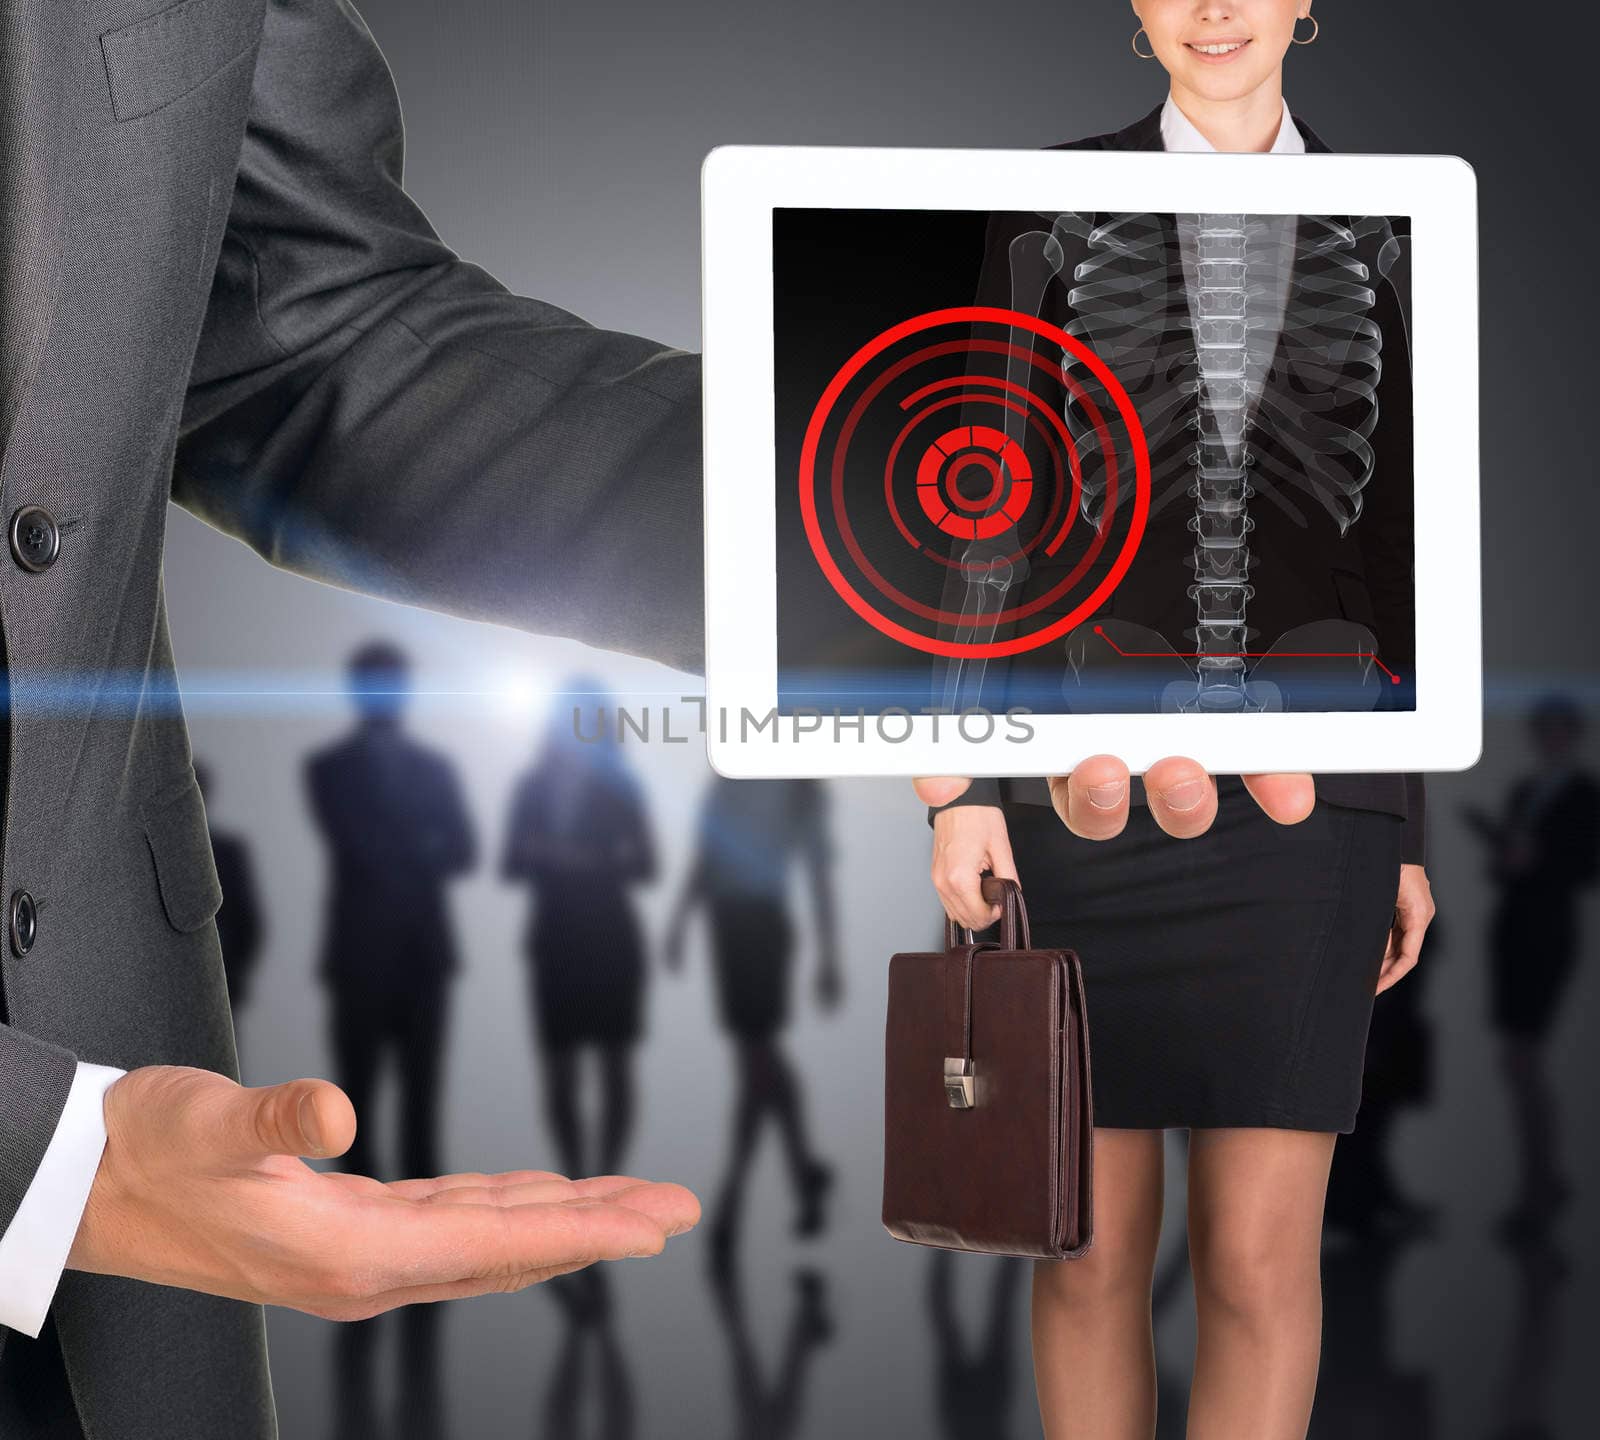 Businessman holding tablet with x-ray of woman